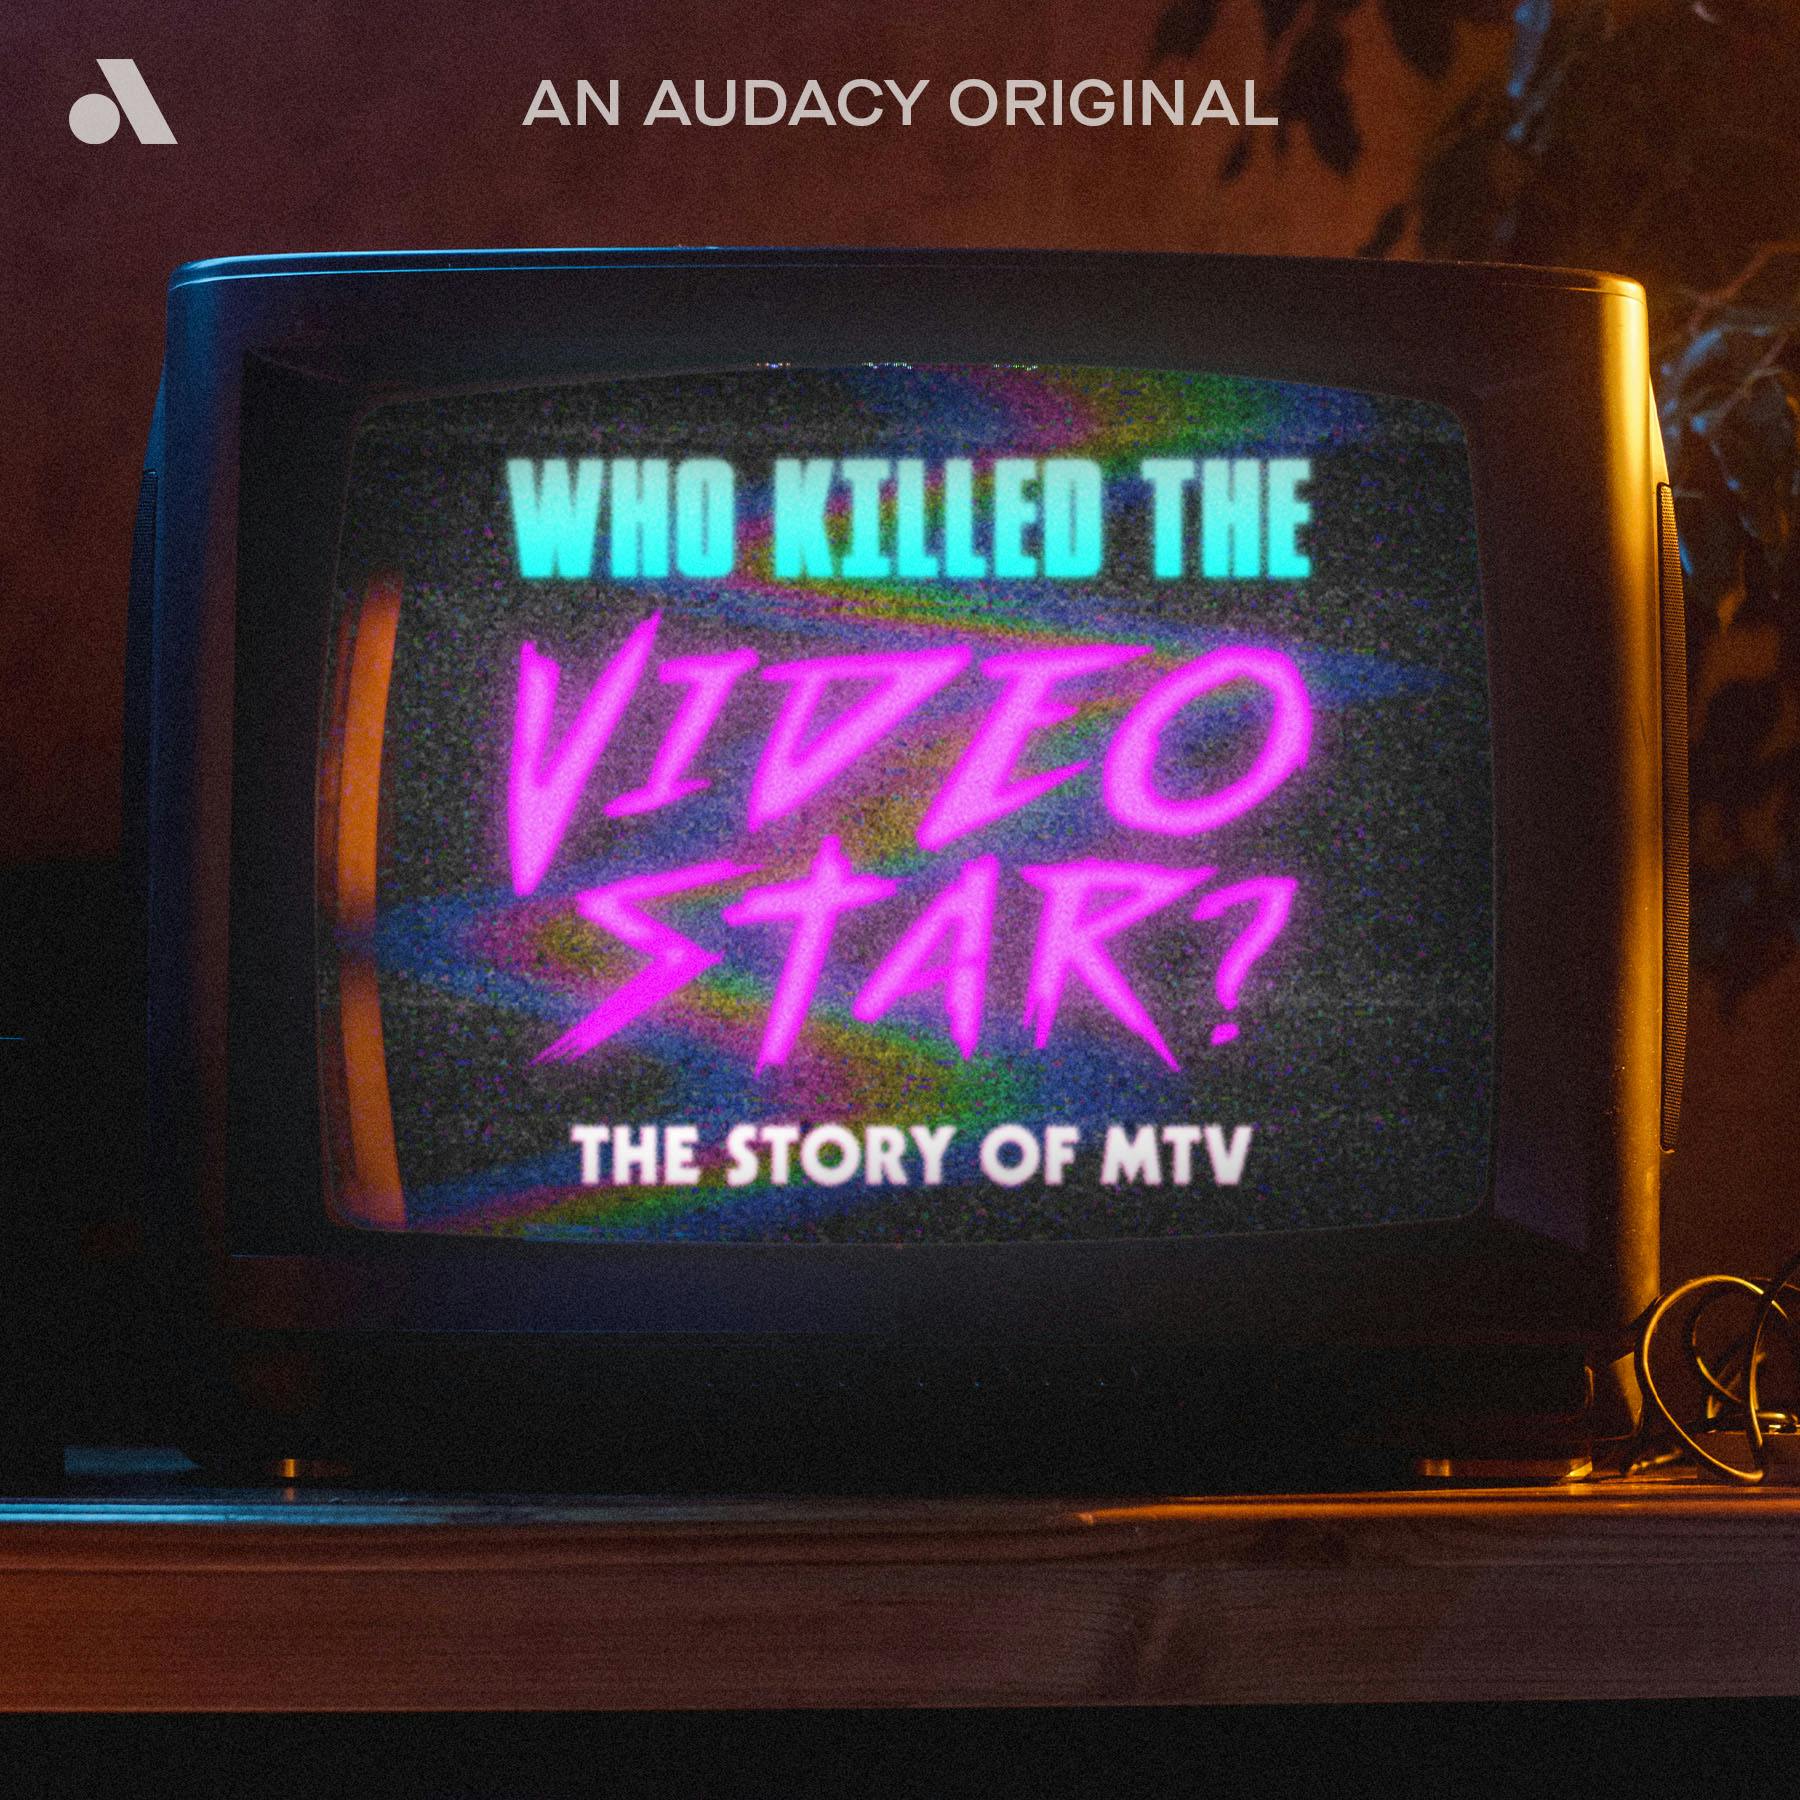 Who Killed the Video Star: The Story of MTV | We Have Liftoff by Audacy Studios